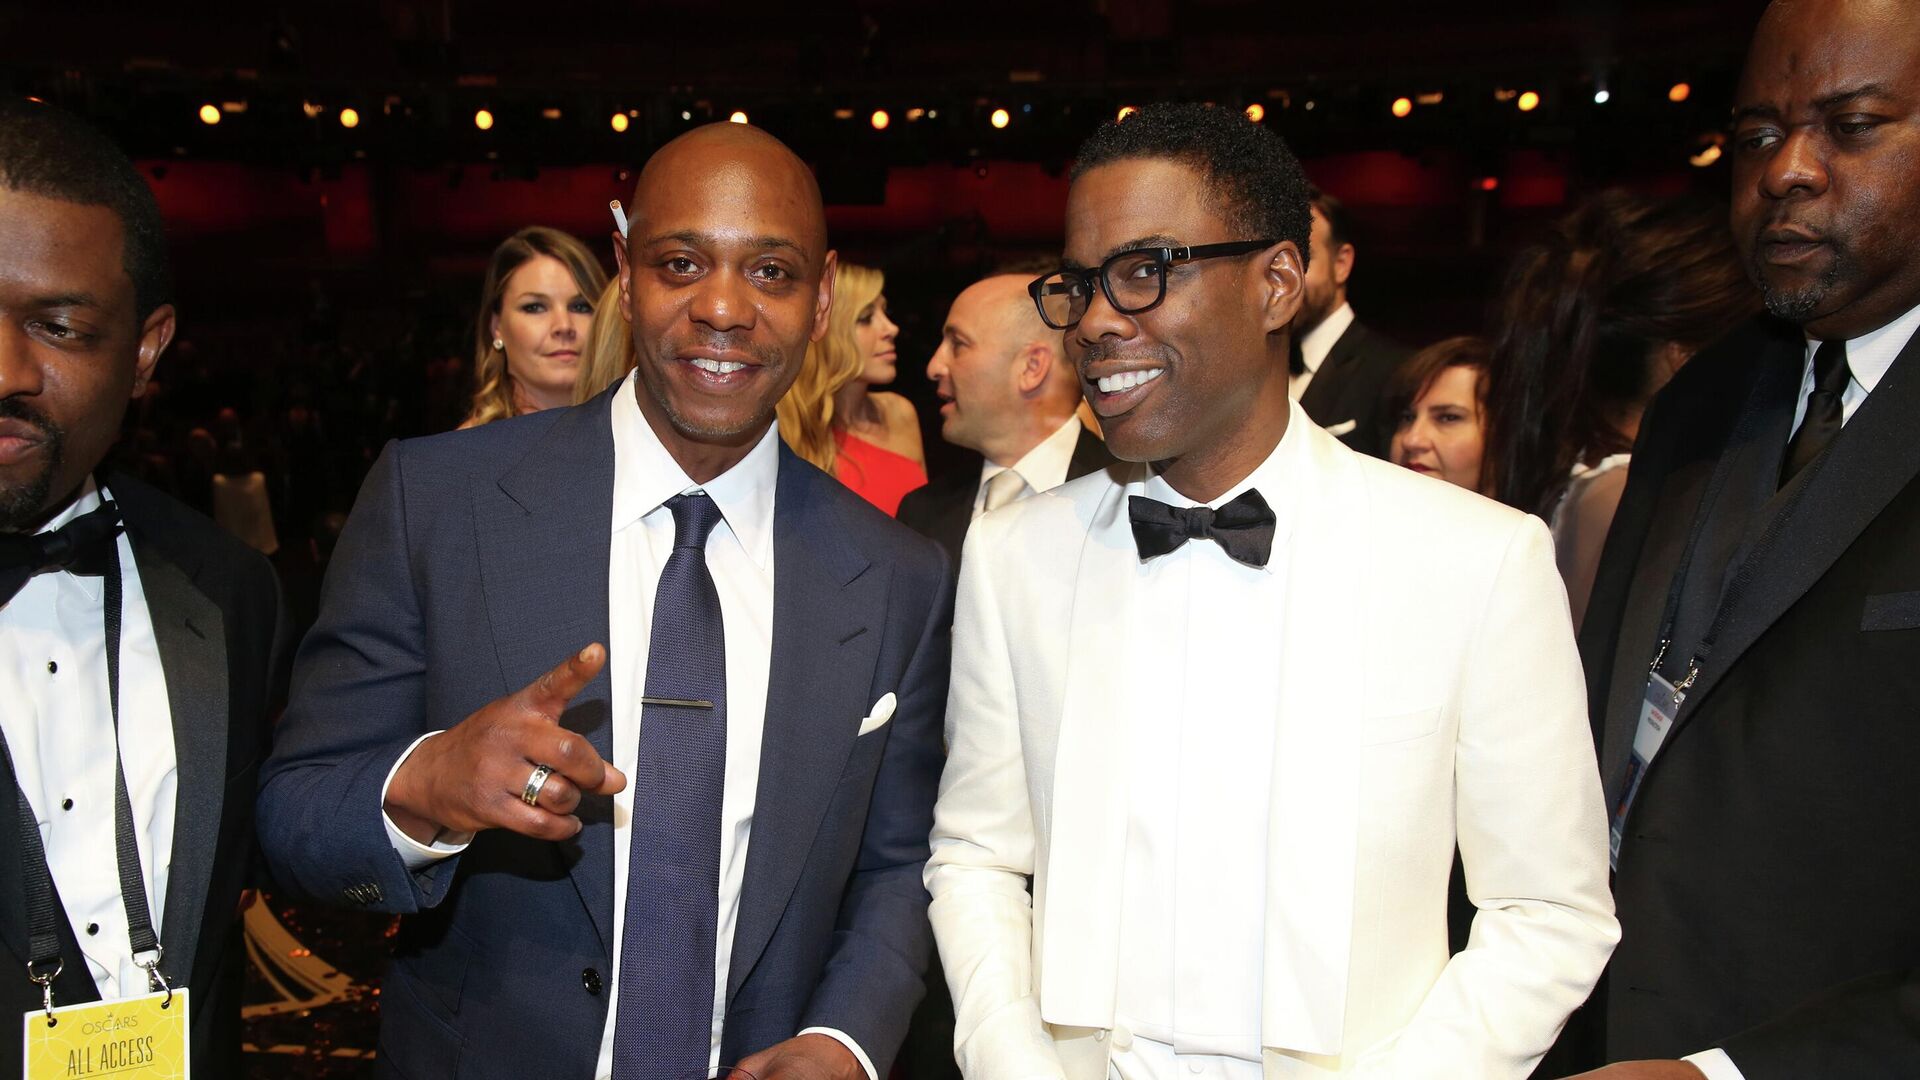 Dave Chappelle, left, and Chris Rock appear backstage at the Oscars on Sunday, Feb. 28, 2016, at the Dolby Theatre in Los Angeles - Sputnik International, 1920, 07.05.2022